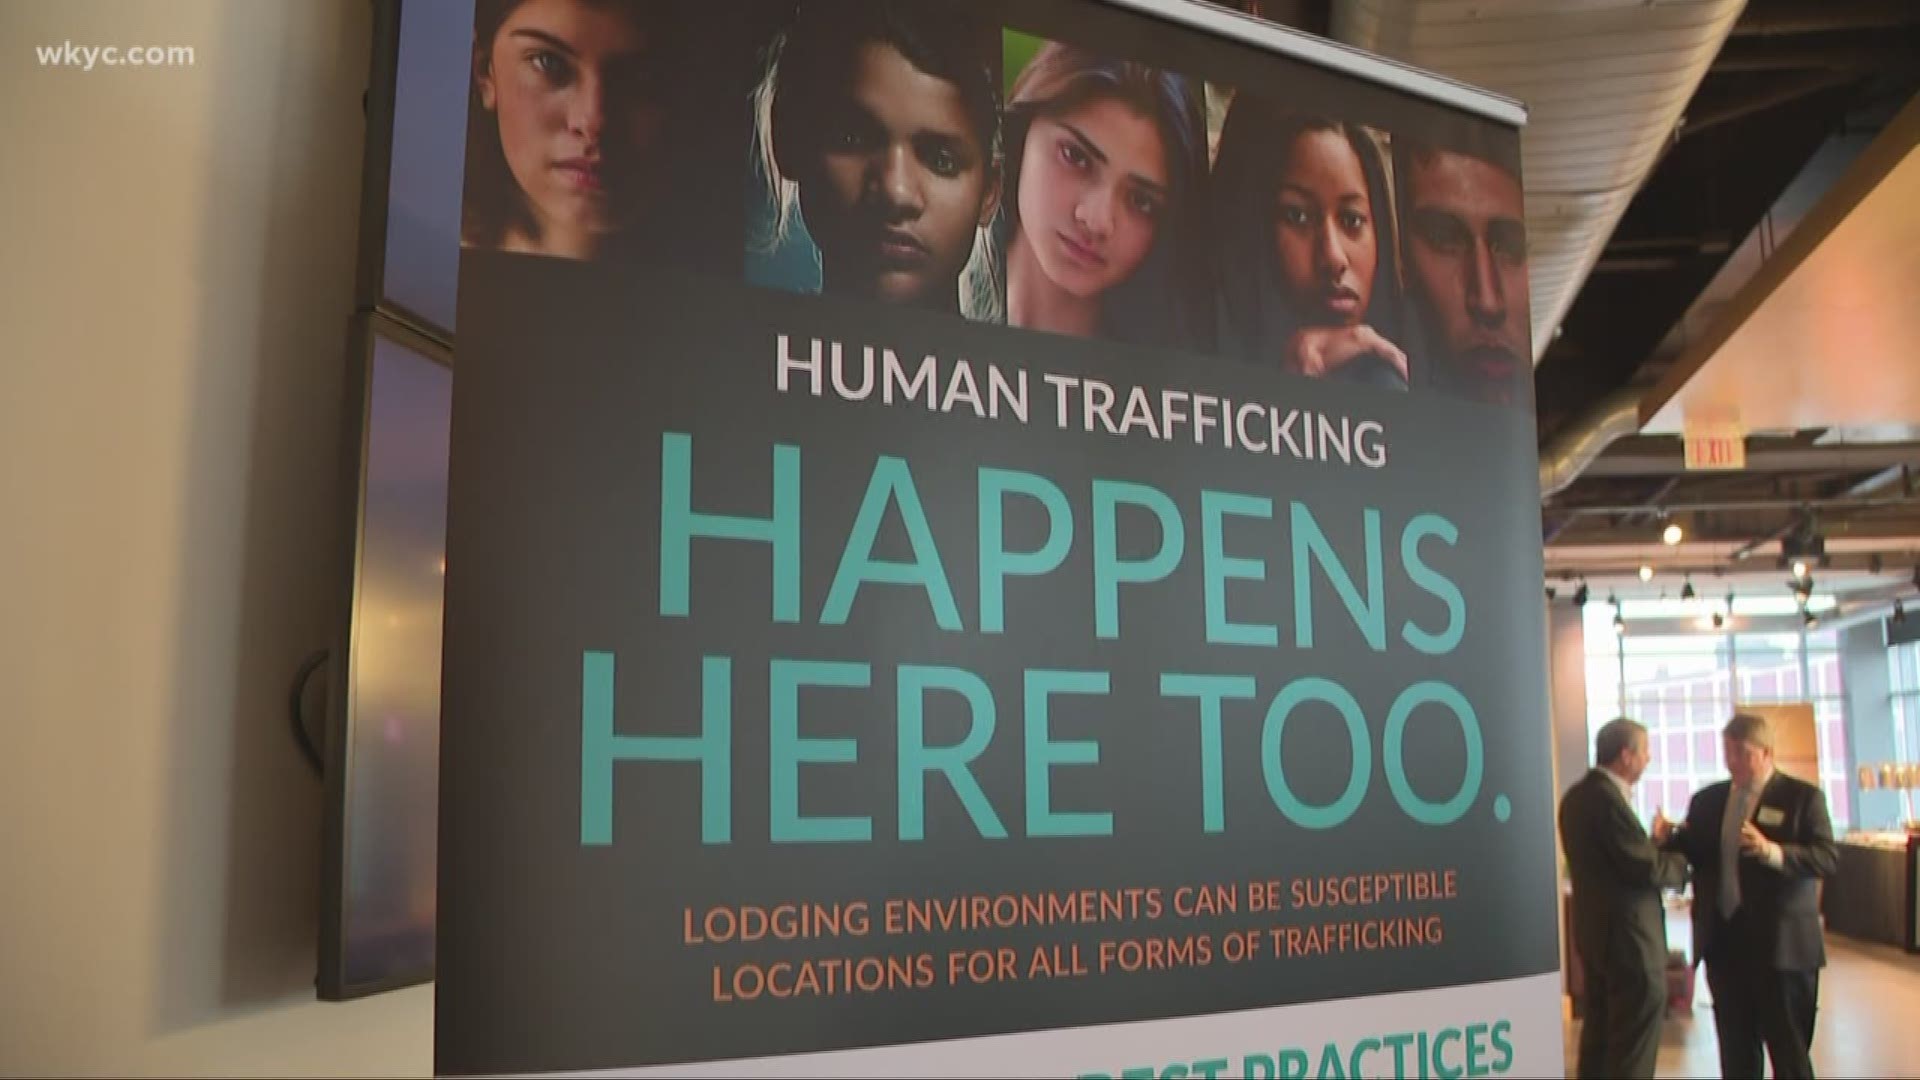 Human trafficking is already happening here. And with the MLB all-star game just weeks away with thousands of visitors coming to Cleveland, a local group says the risks of more cases are even greater.